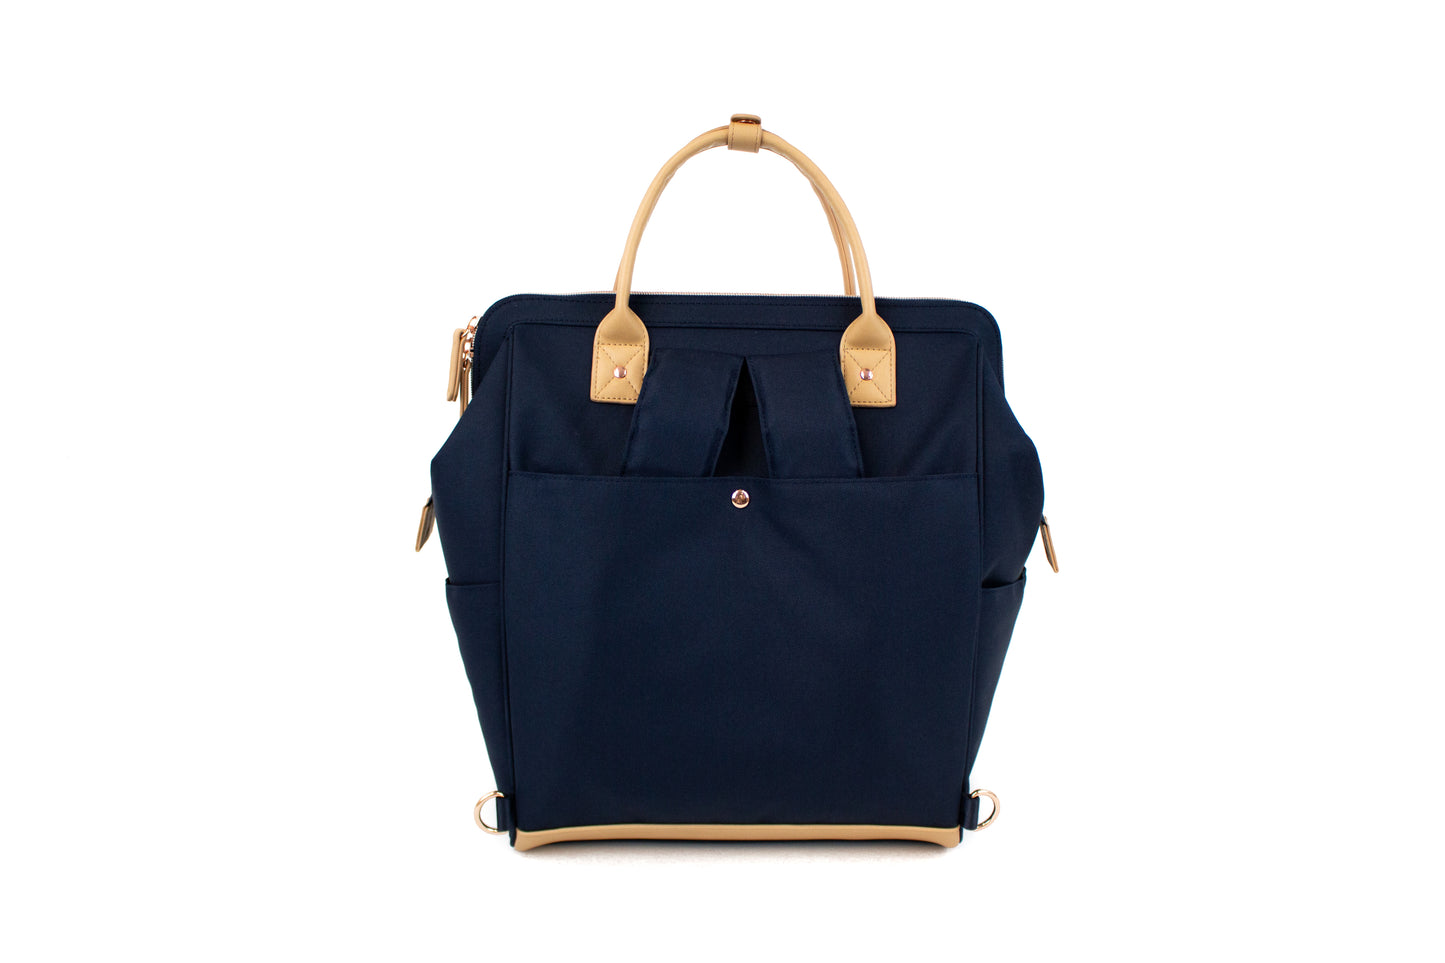 Navy Blue - Back View, Straps Tucked